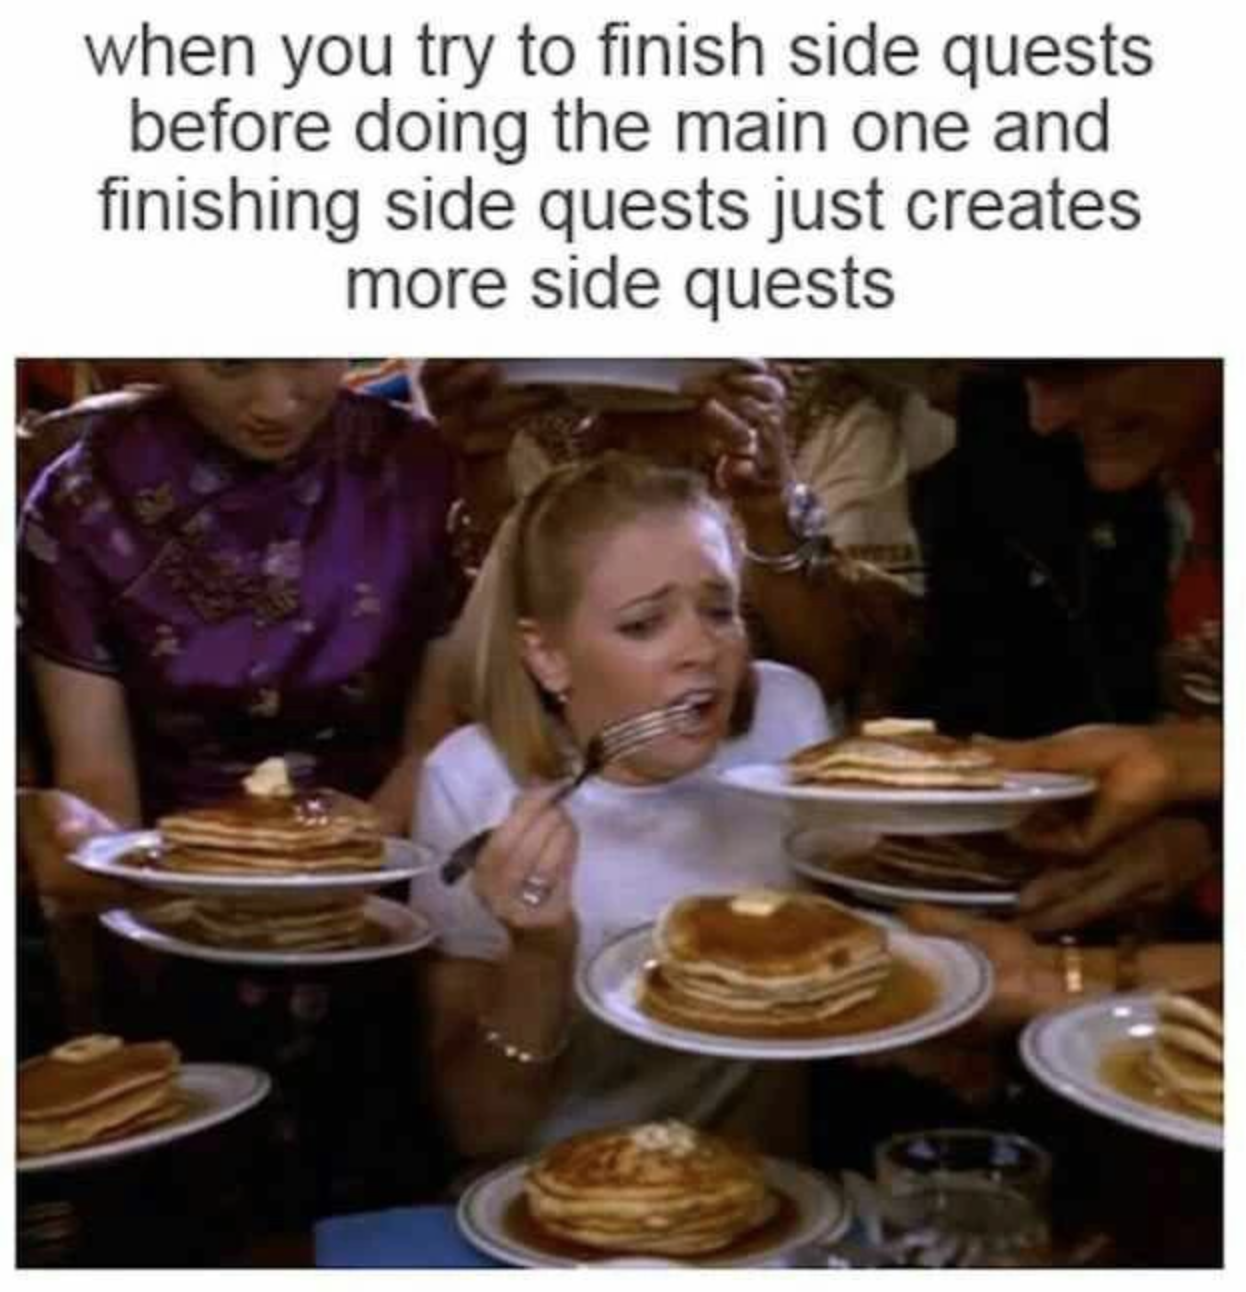 funny gaming memes - side quests meme - when you try to finish side quests before doing the main one and finishing side quests just creates more side quests